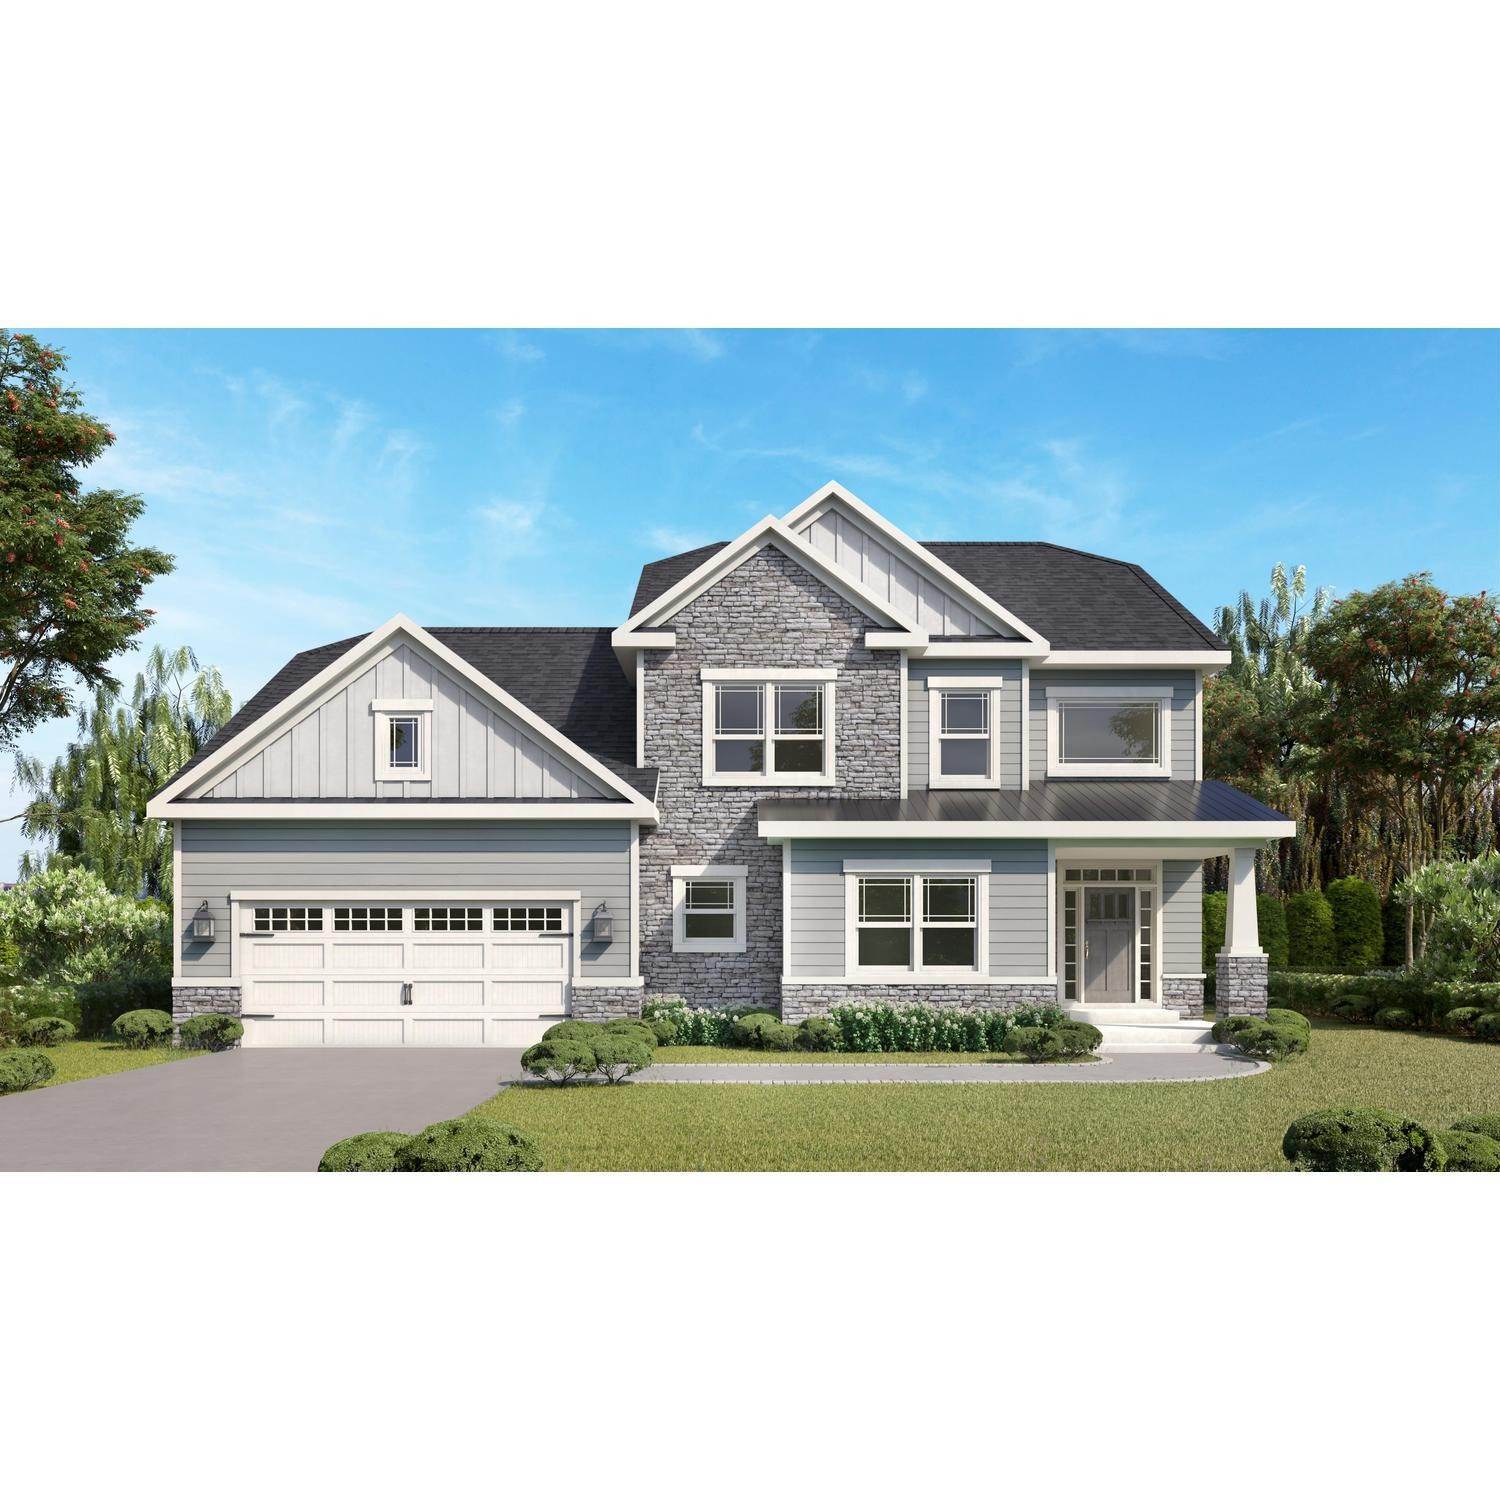 Single Family for Sale at Garnet Pointe Garnet Valley, PA 19060